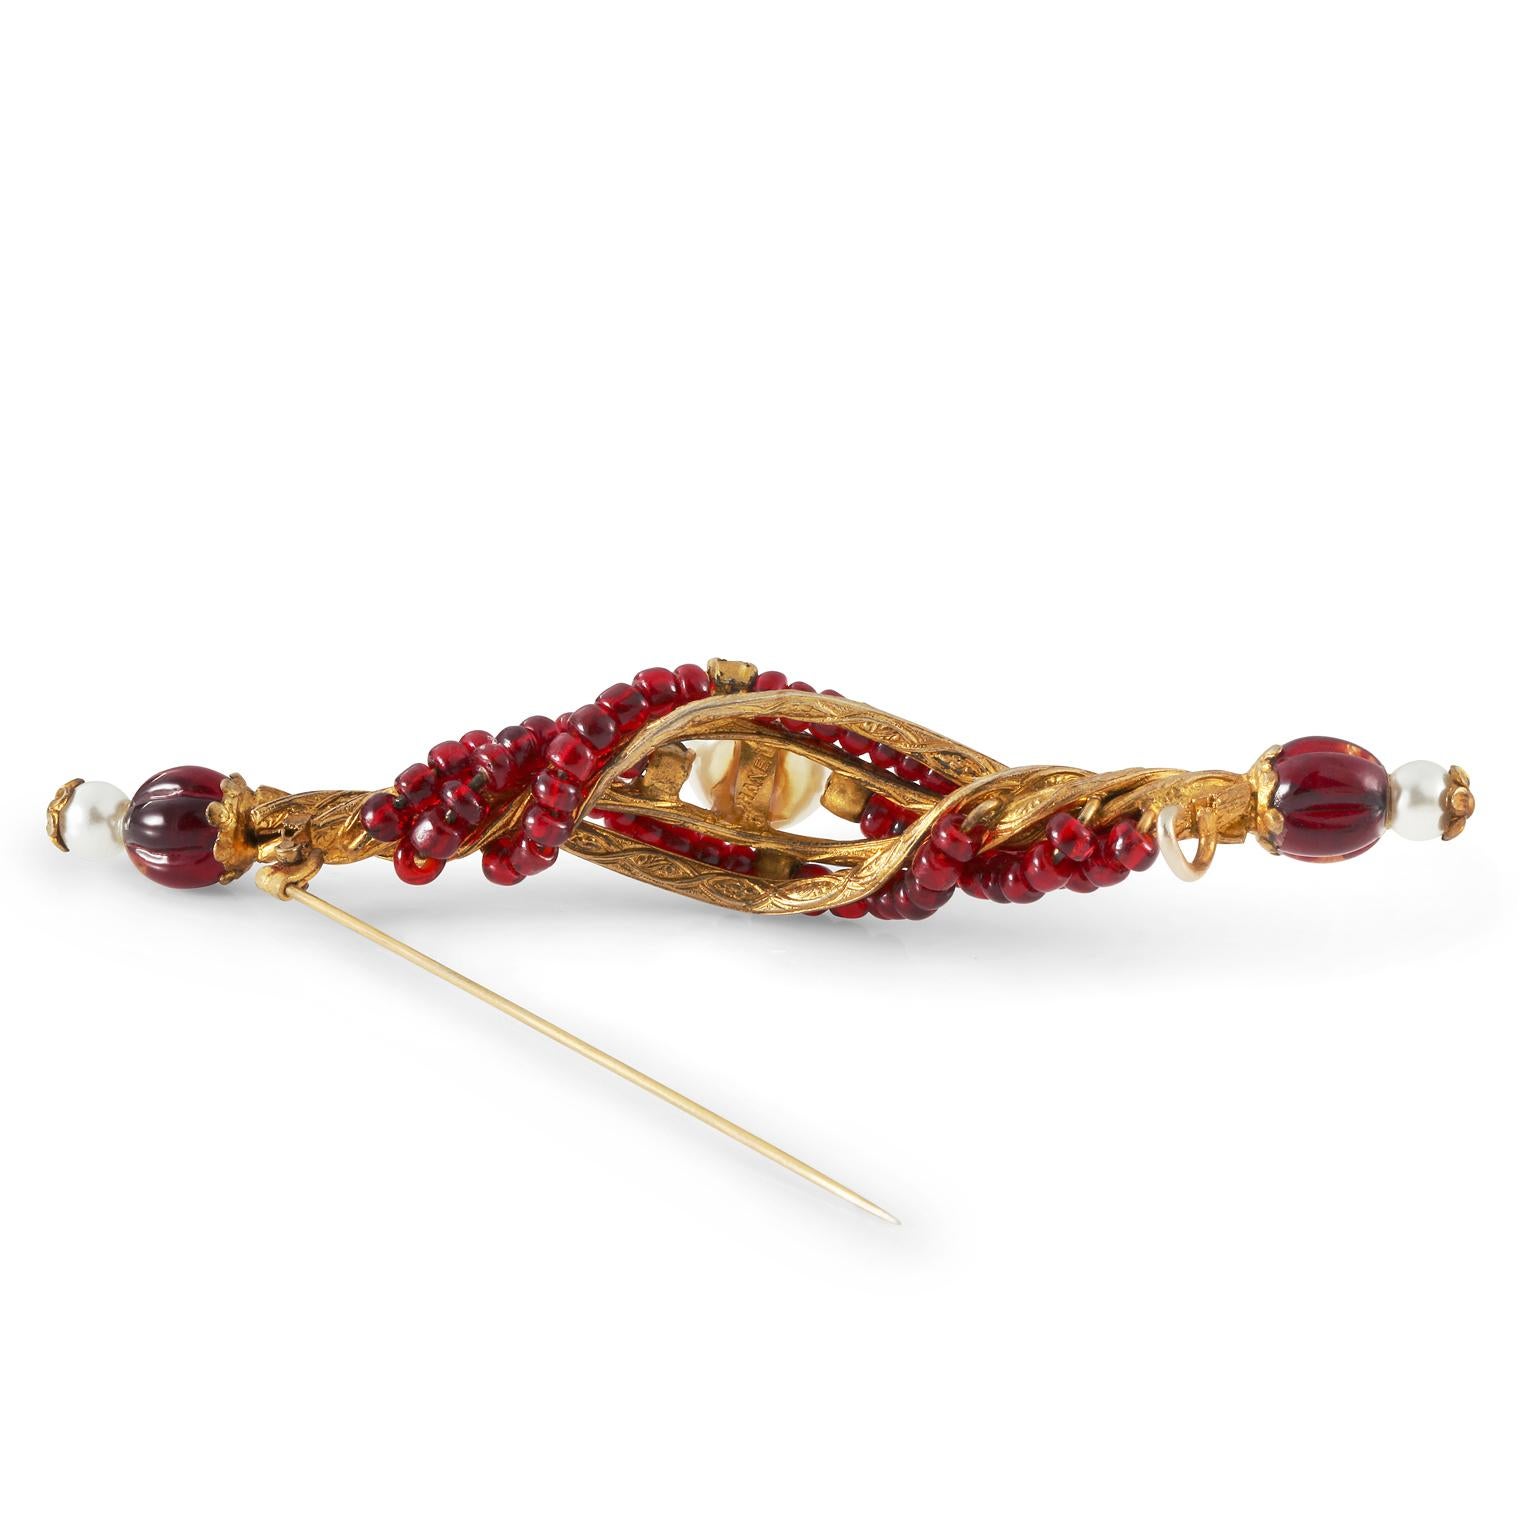 This authentic Chanel Red Gripoix Bead and Pearl Pin is an early vintage piece in excellent condition.  Gold twisted design incorporates red Gripoix beads and a center faux pearl flanked by four small crystals.  Finial capped ends each have a small